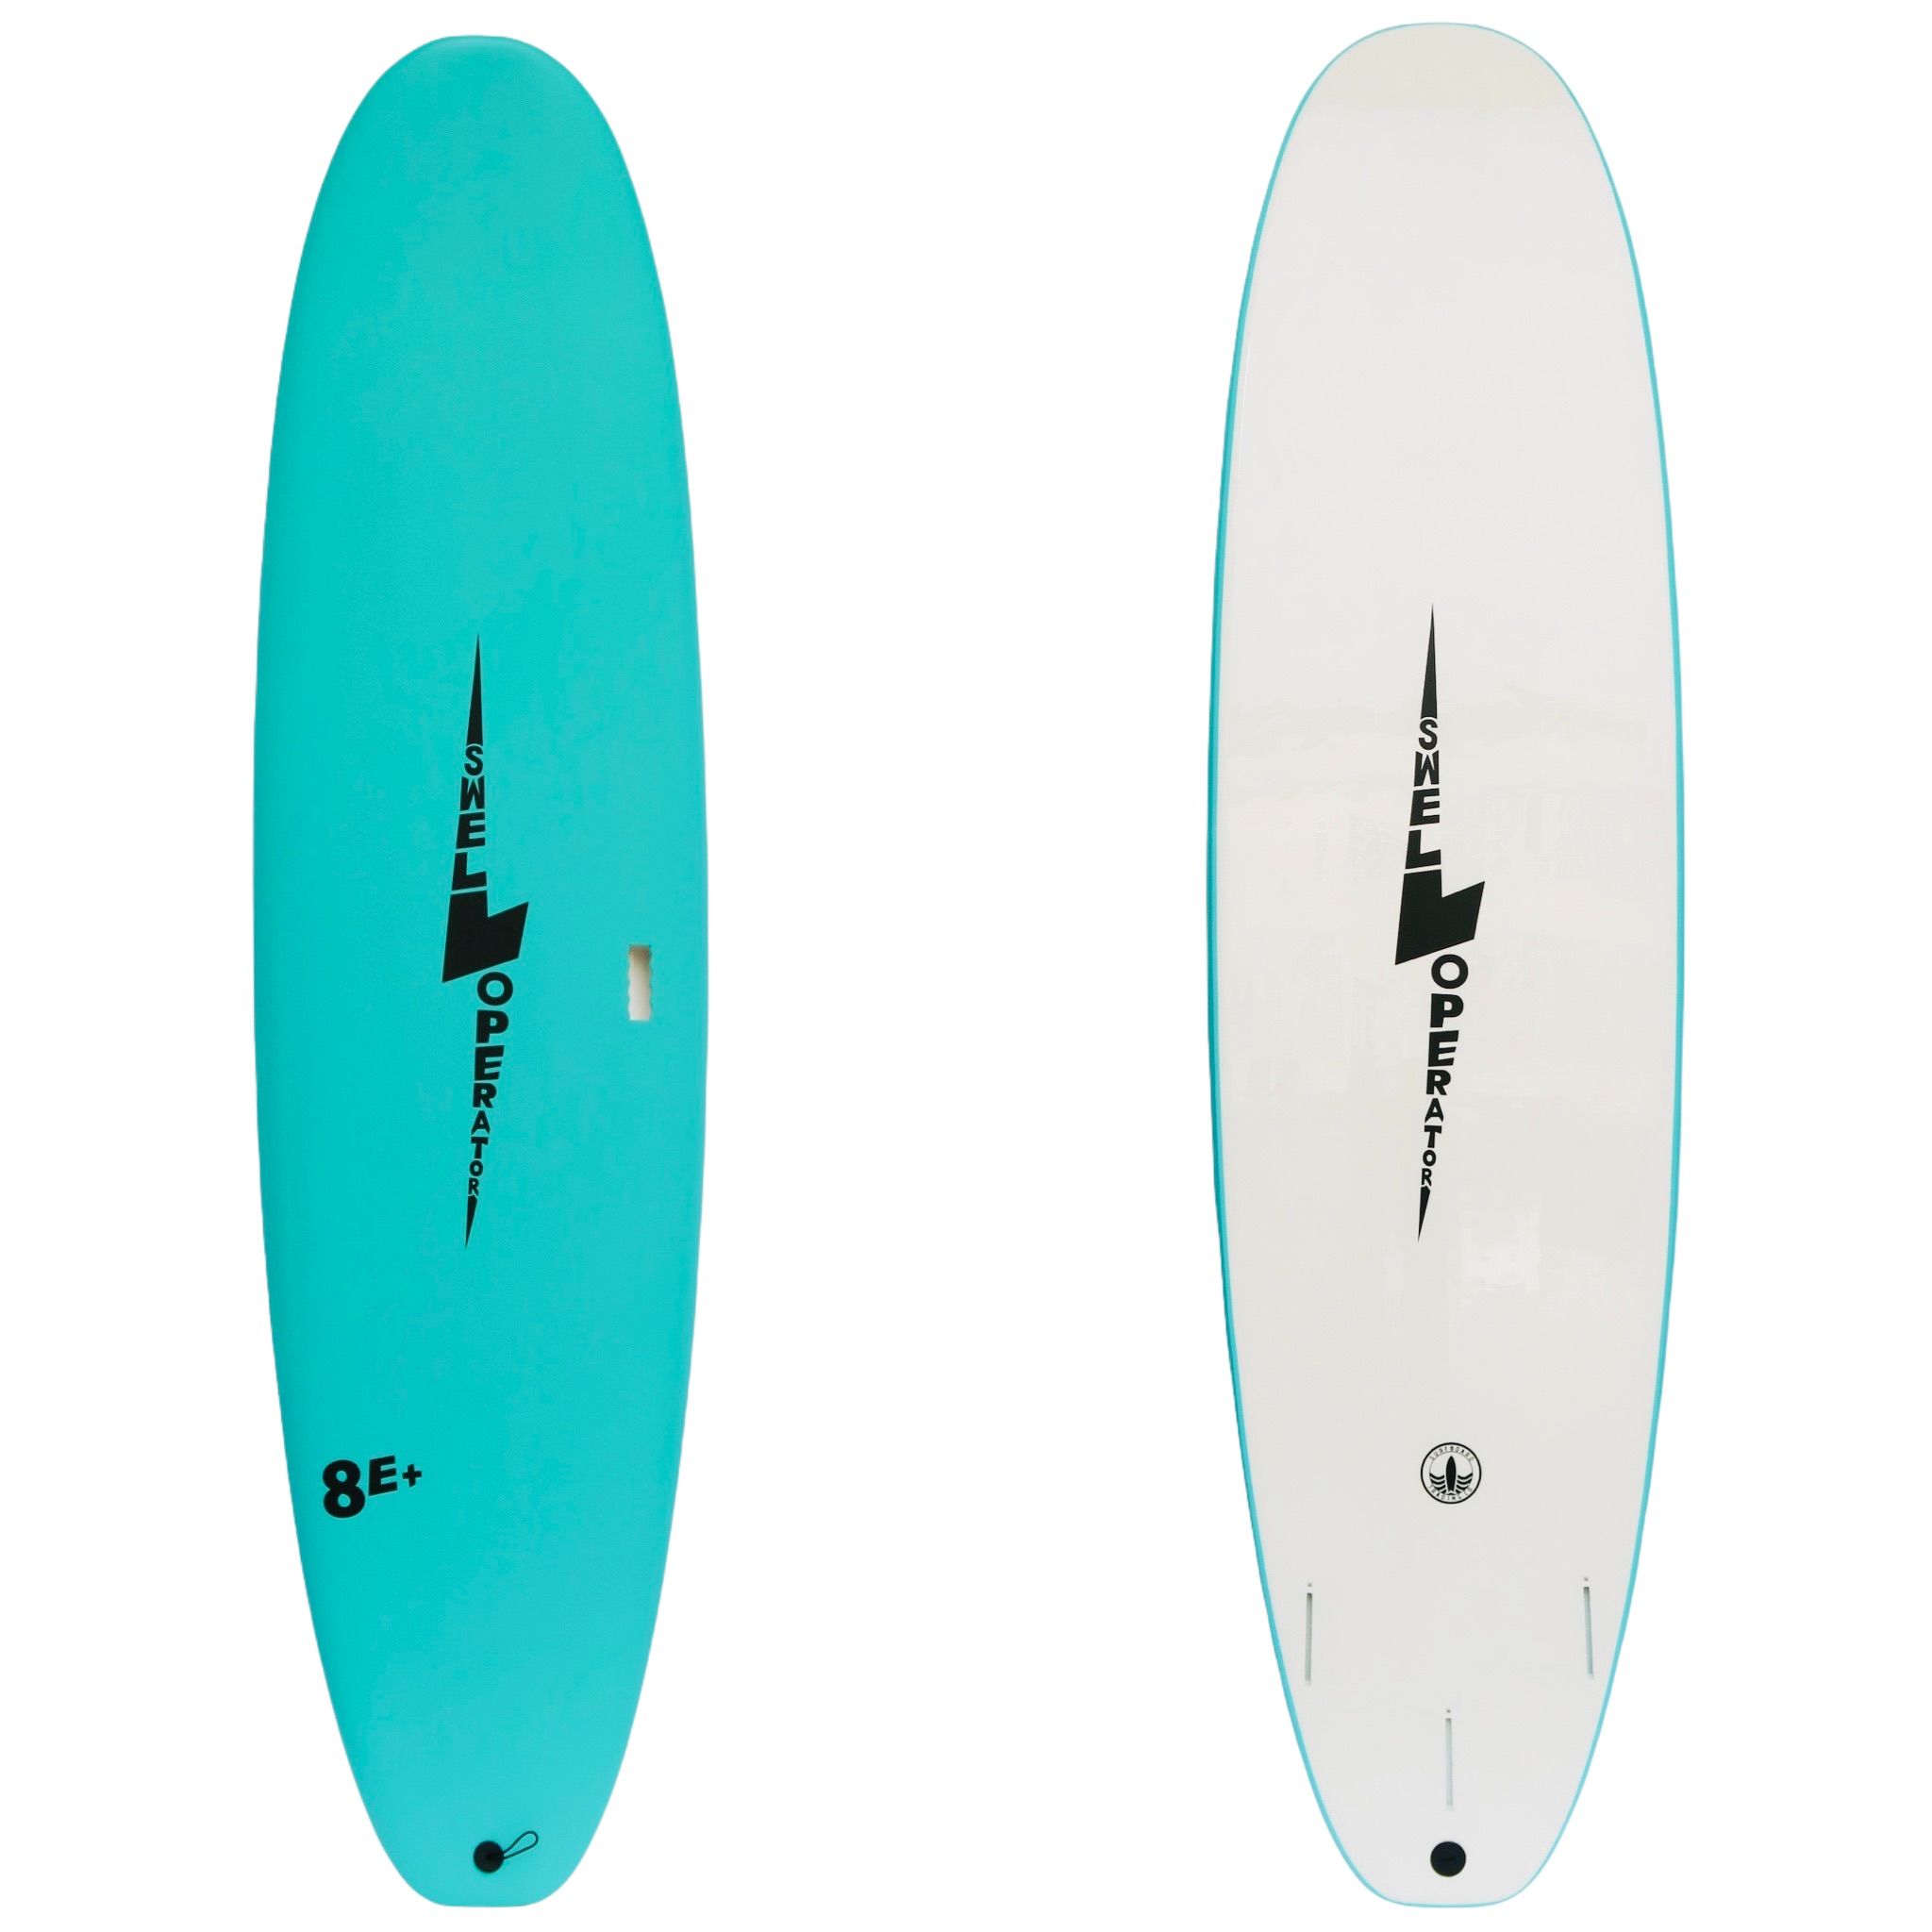 8' Swell Operator EPS CORE Surfboard - Five Color Options